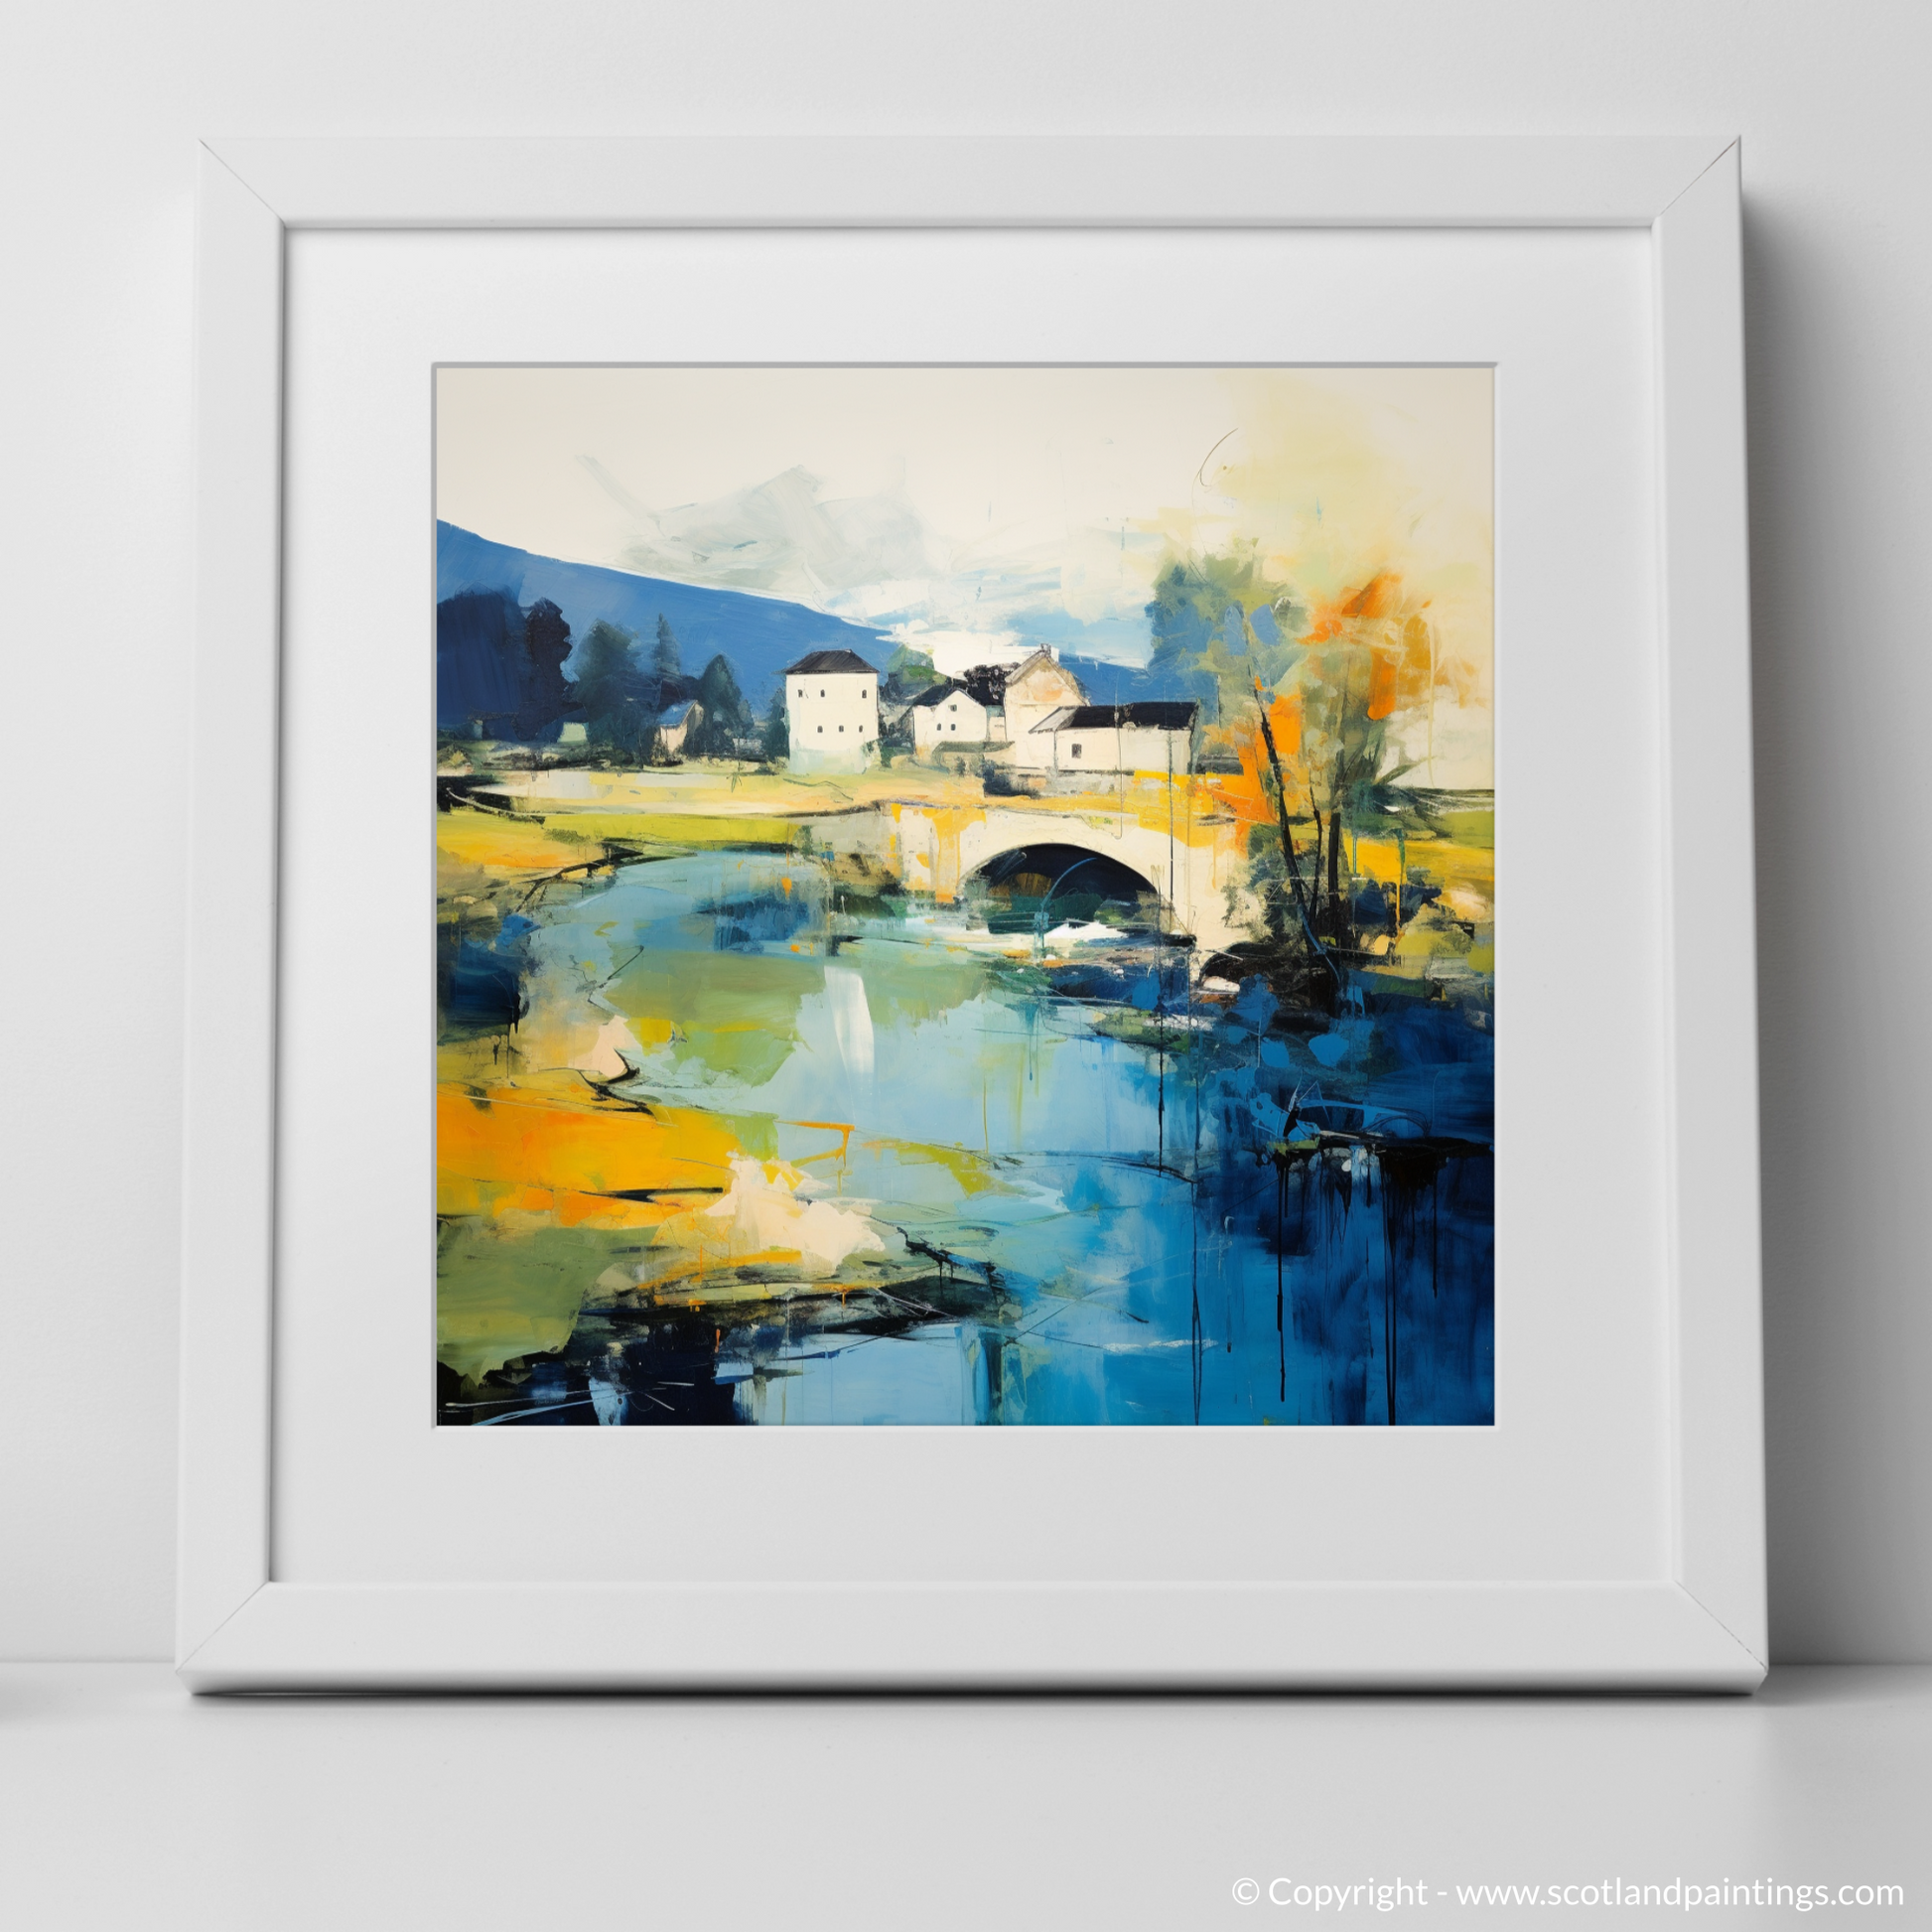 Art Print of River Almond, Edinburgh in summer with a white frame